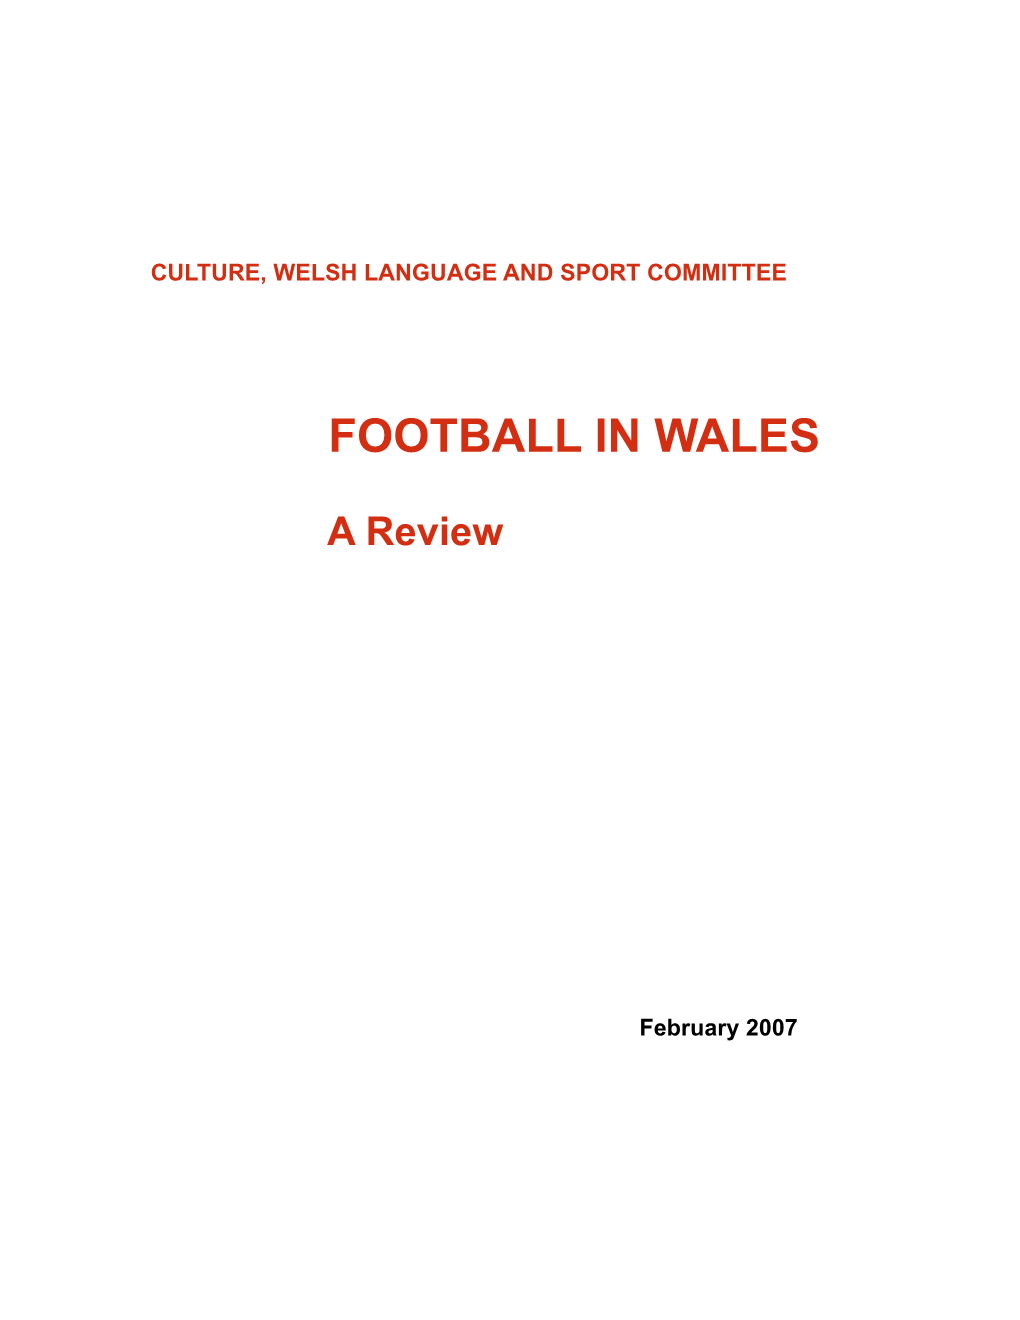 Football in Wales